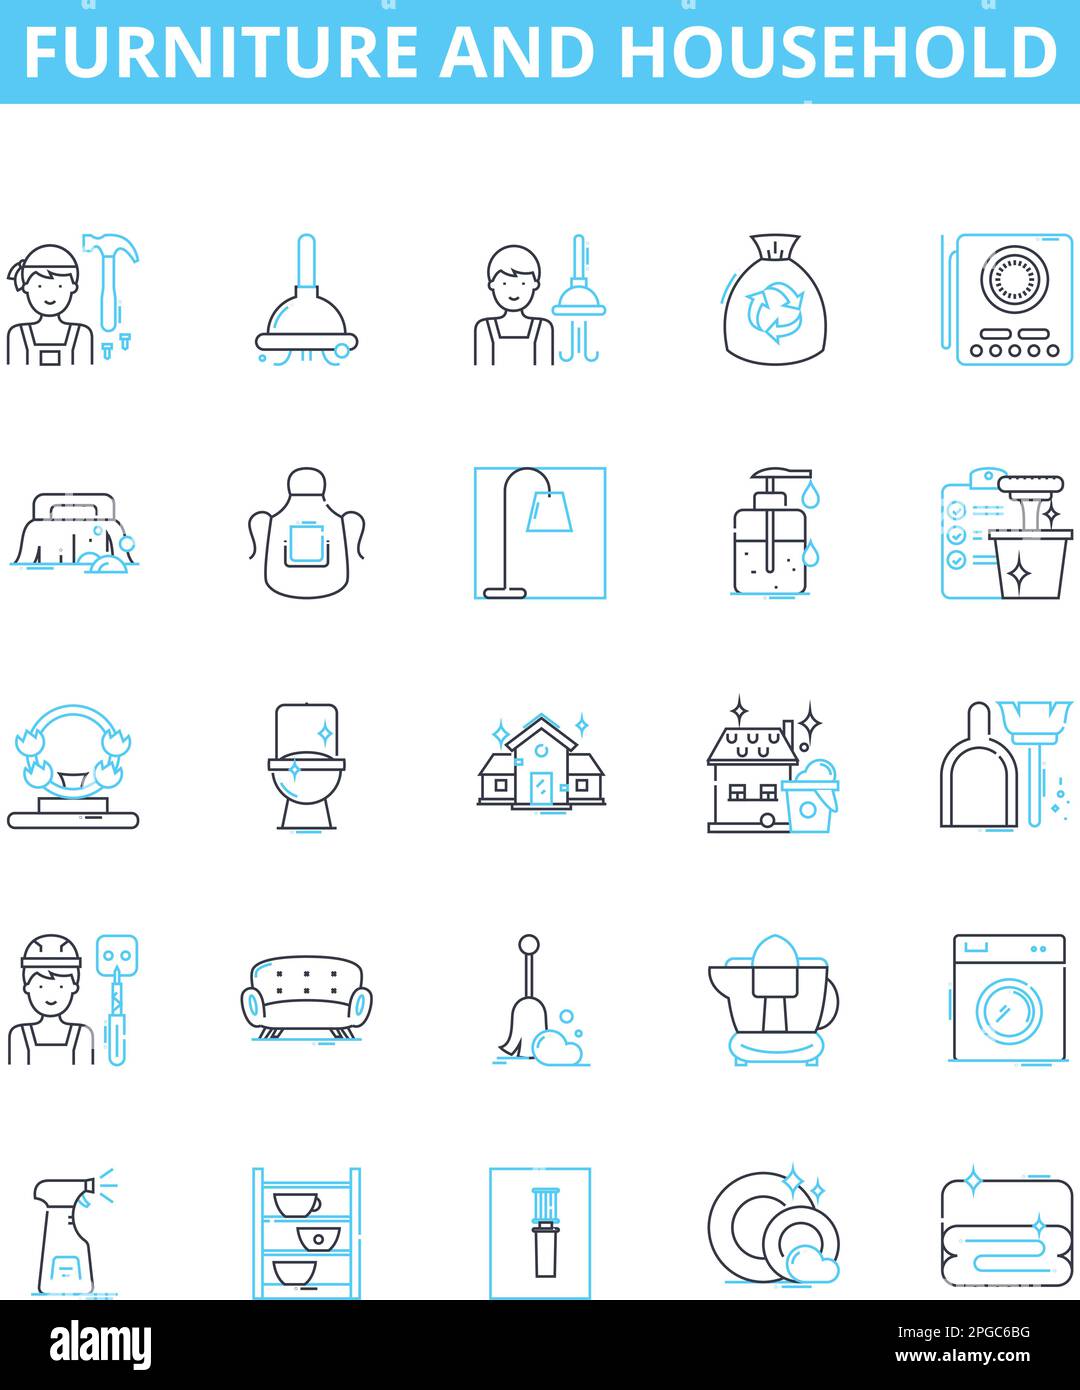 Furniture and household vector line icons set. Furniture, Household, Chair, Couch, Table, Desk, Bed illustration outline concept symbols and signs Stock Vector